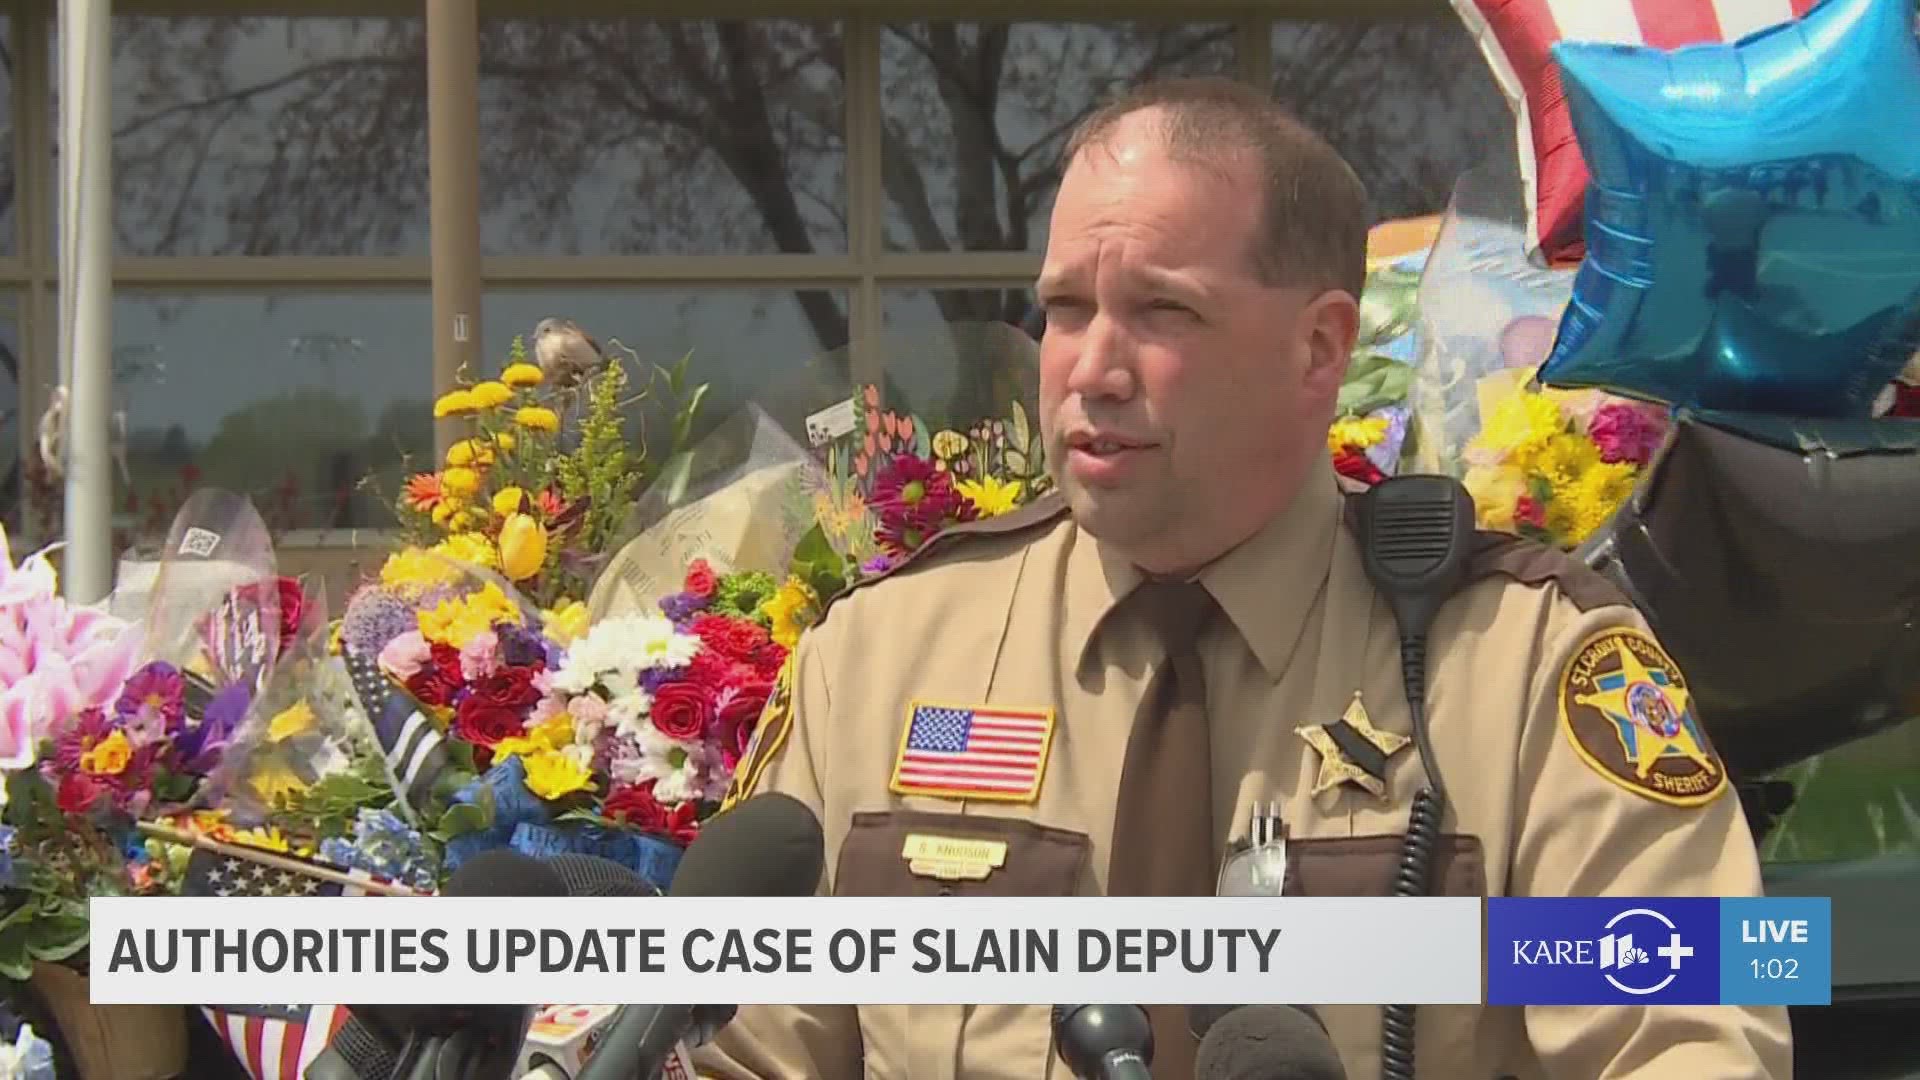 St. Croix County Sheriff Scott Knudson was at turns emotional, angry and exhausted when describing the loss of slain deputy Kaitie Leising.